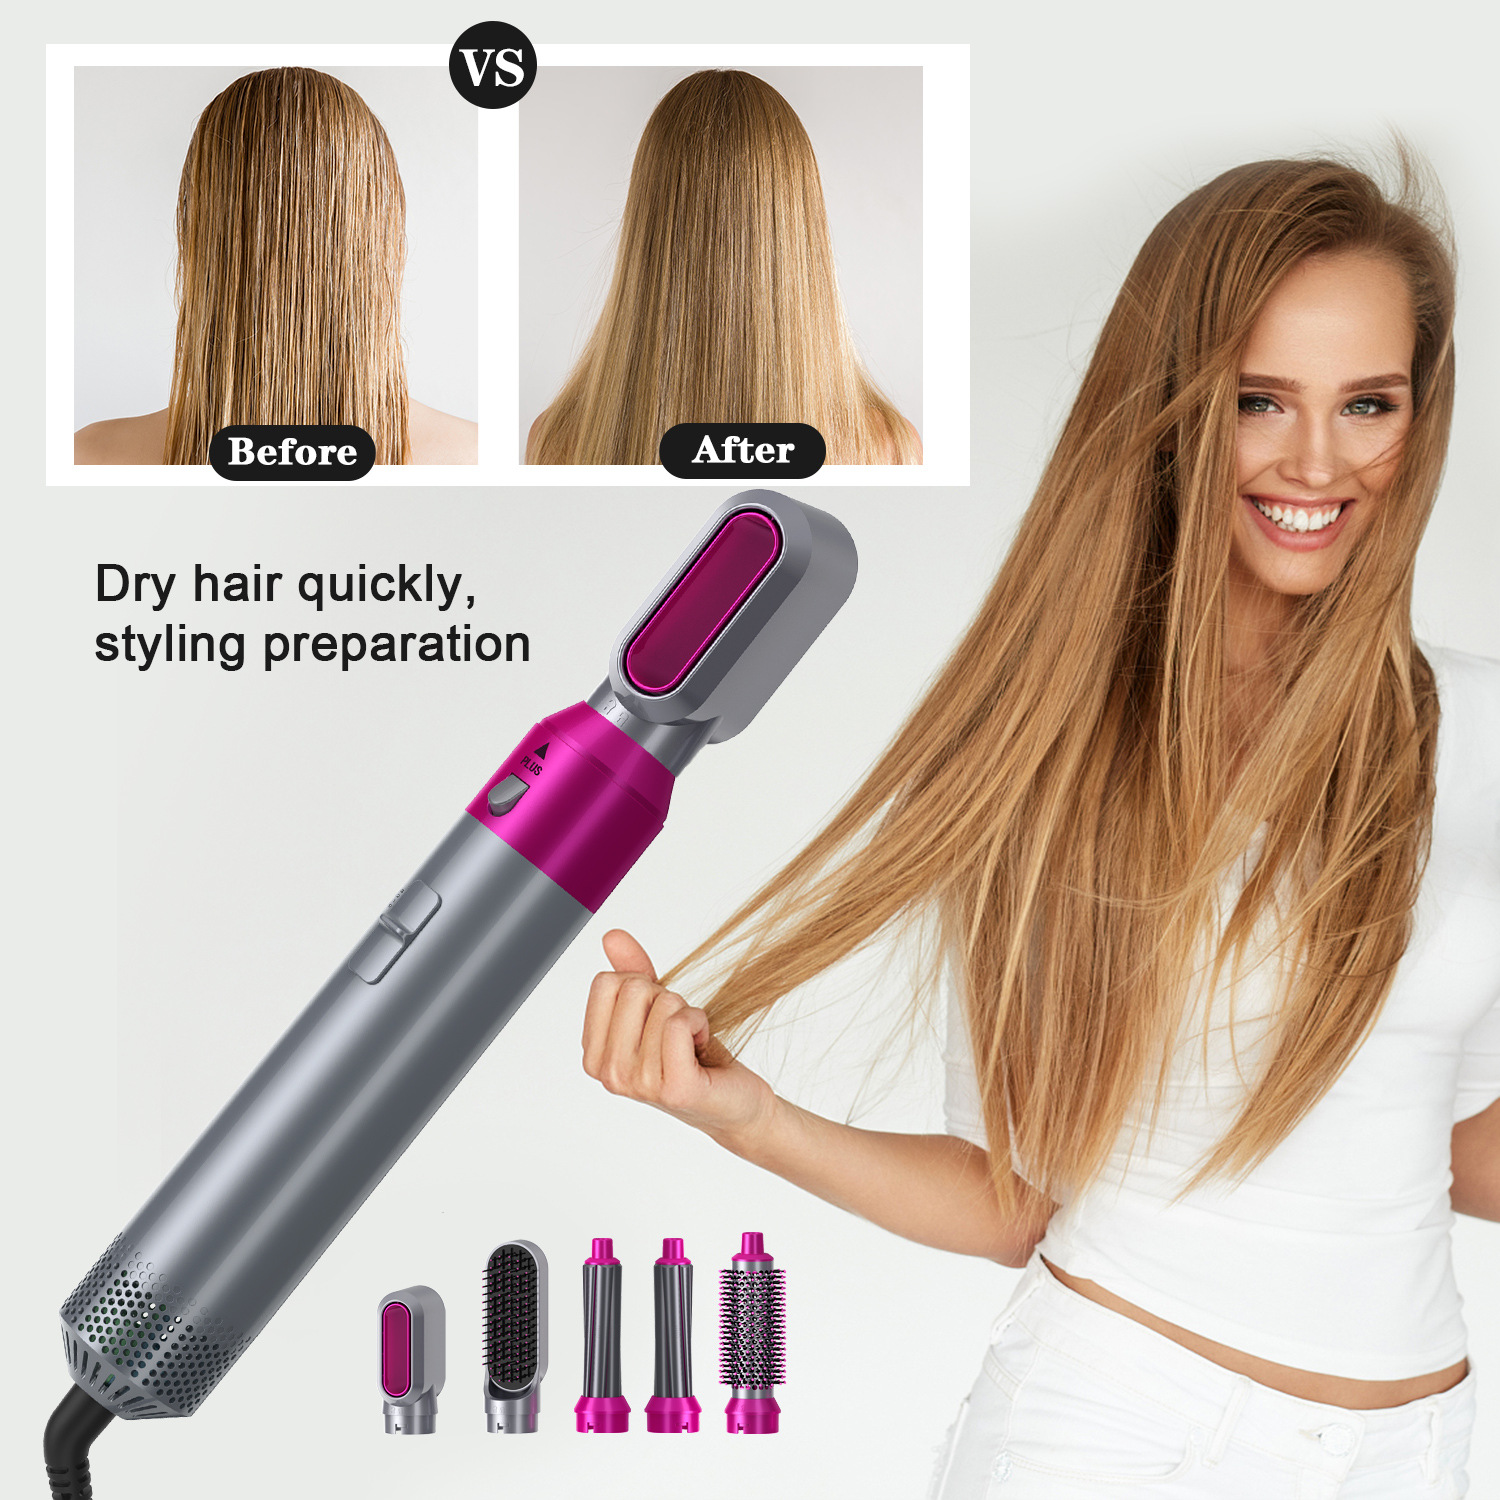 

Electric Hair Dryers 5 In 1 Hairs Comb Negative Ion Straightener Brush Blow Dryer Air Wrap Curlings Wand Detachable Brushes Kits Curler Dry Styler